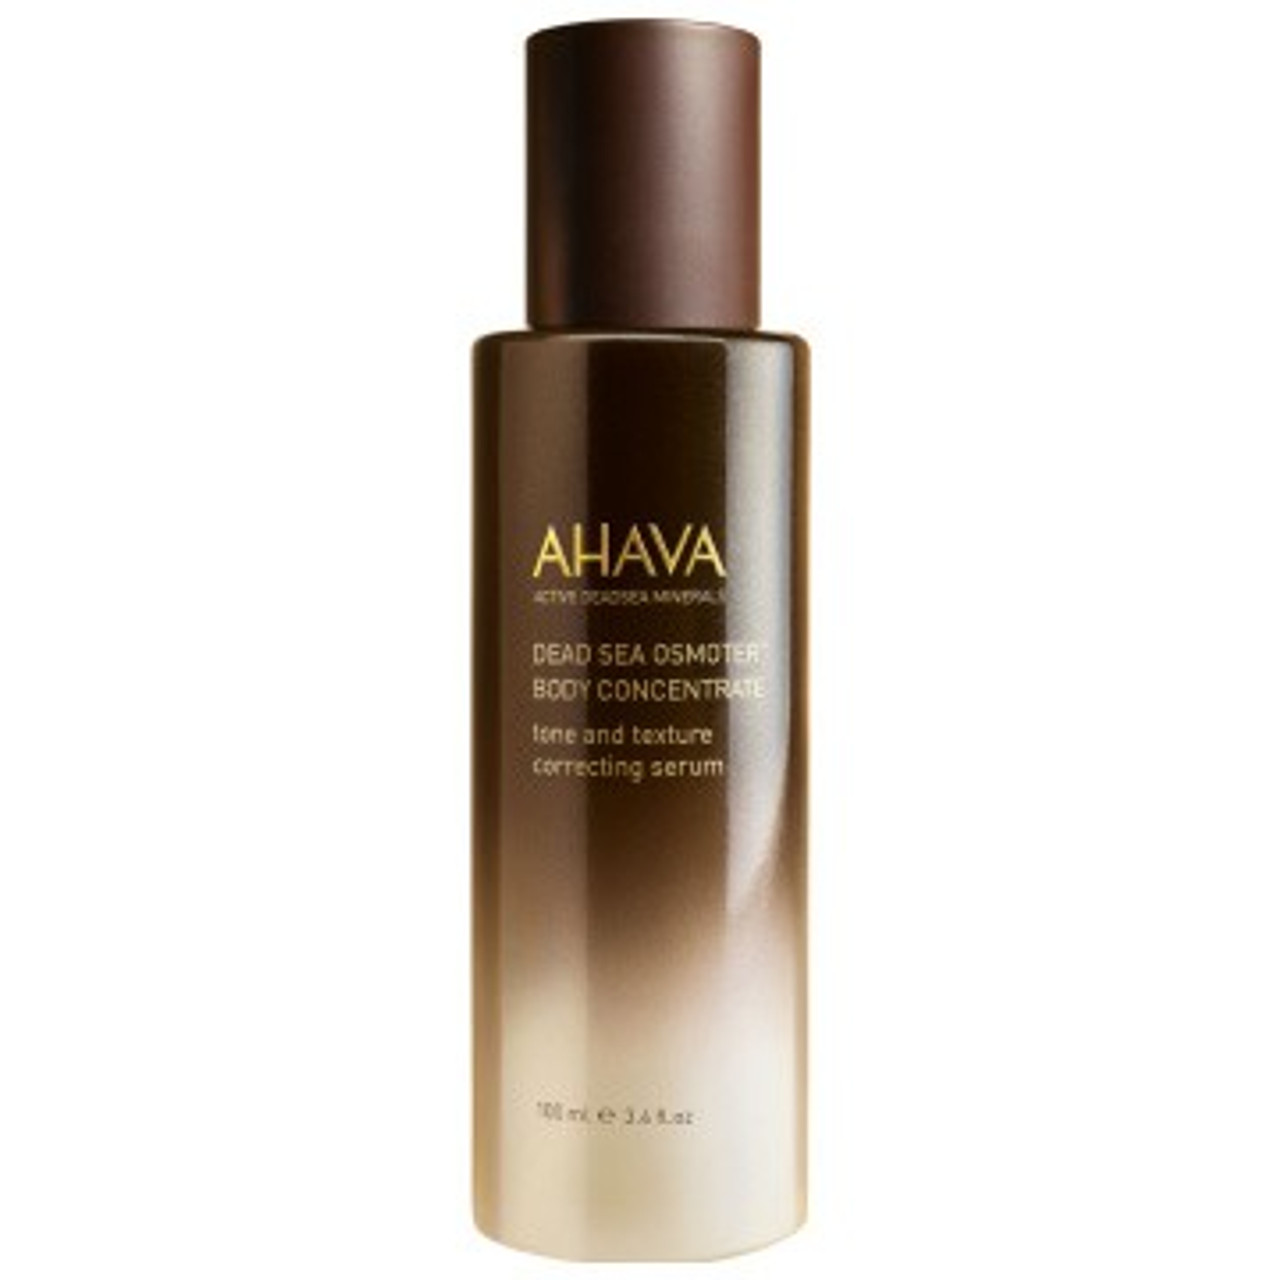 AHAVA DeadSea Osmoter Body Concentrate - 3.4 oz